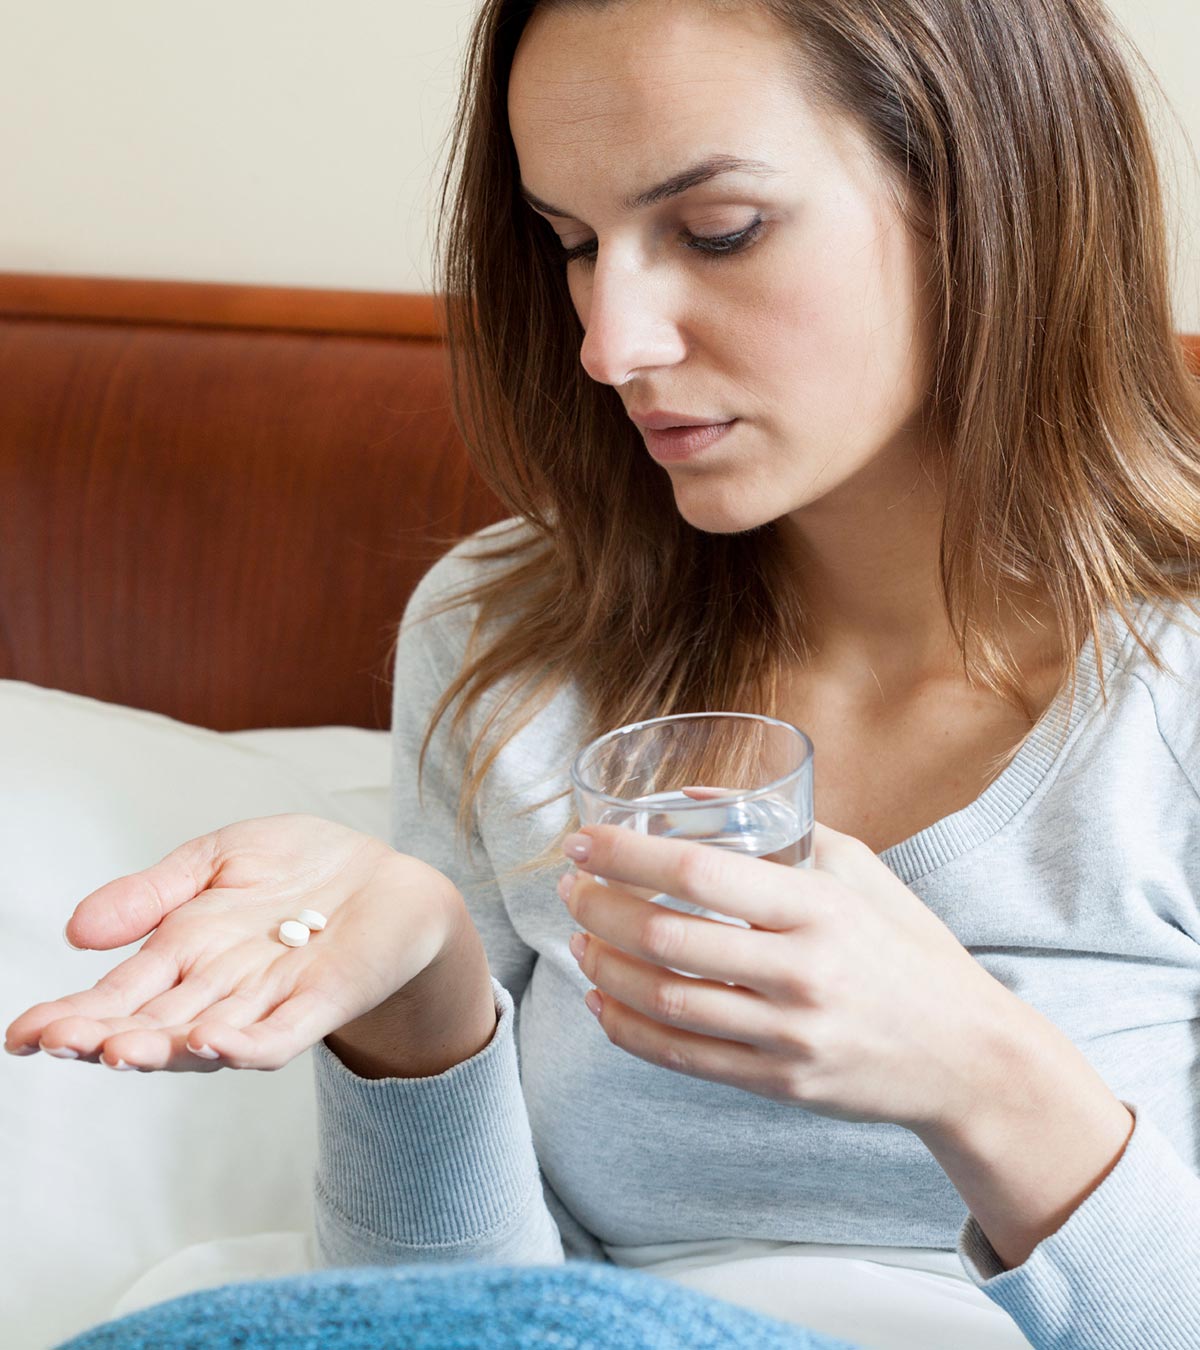 Is It Safe To Take Naproxen While Breastfeeding